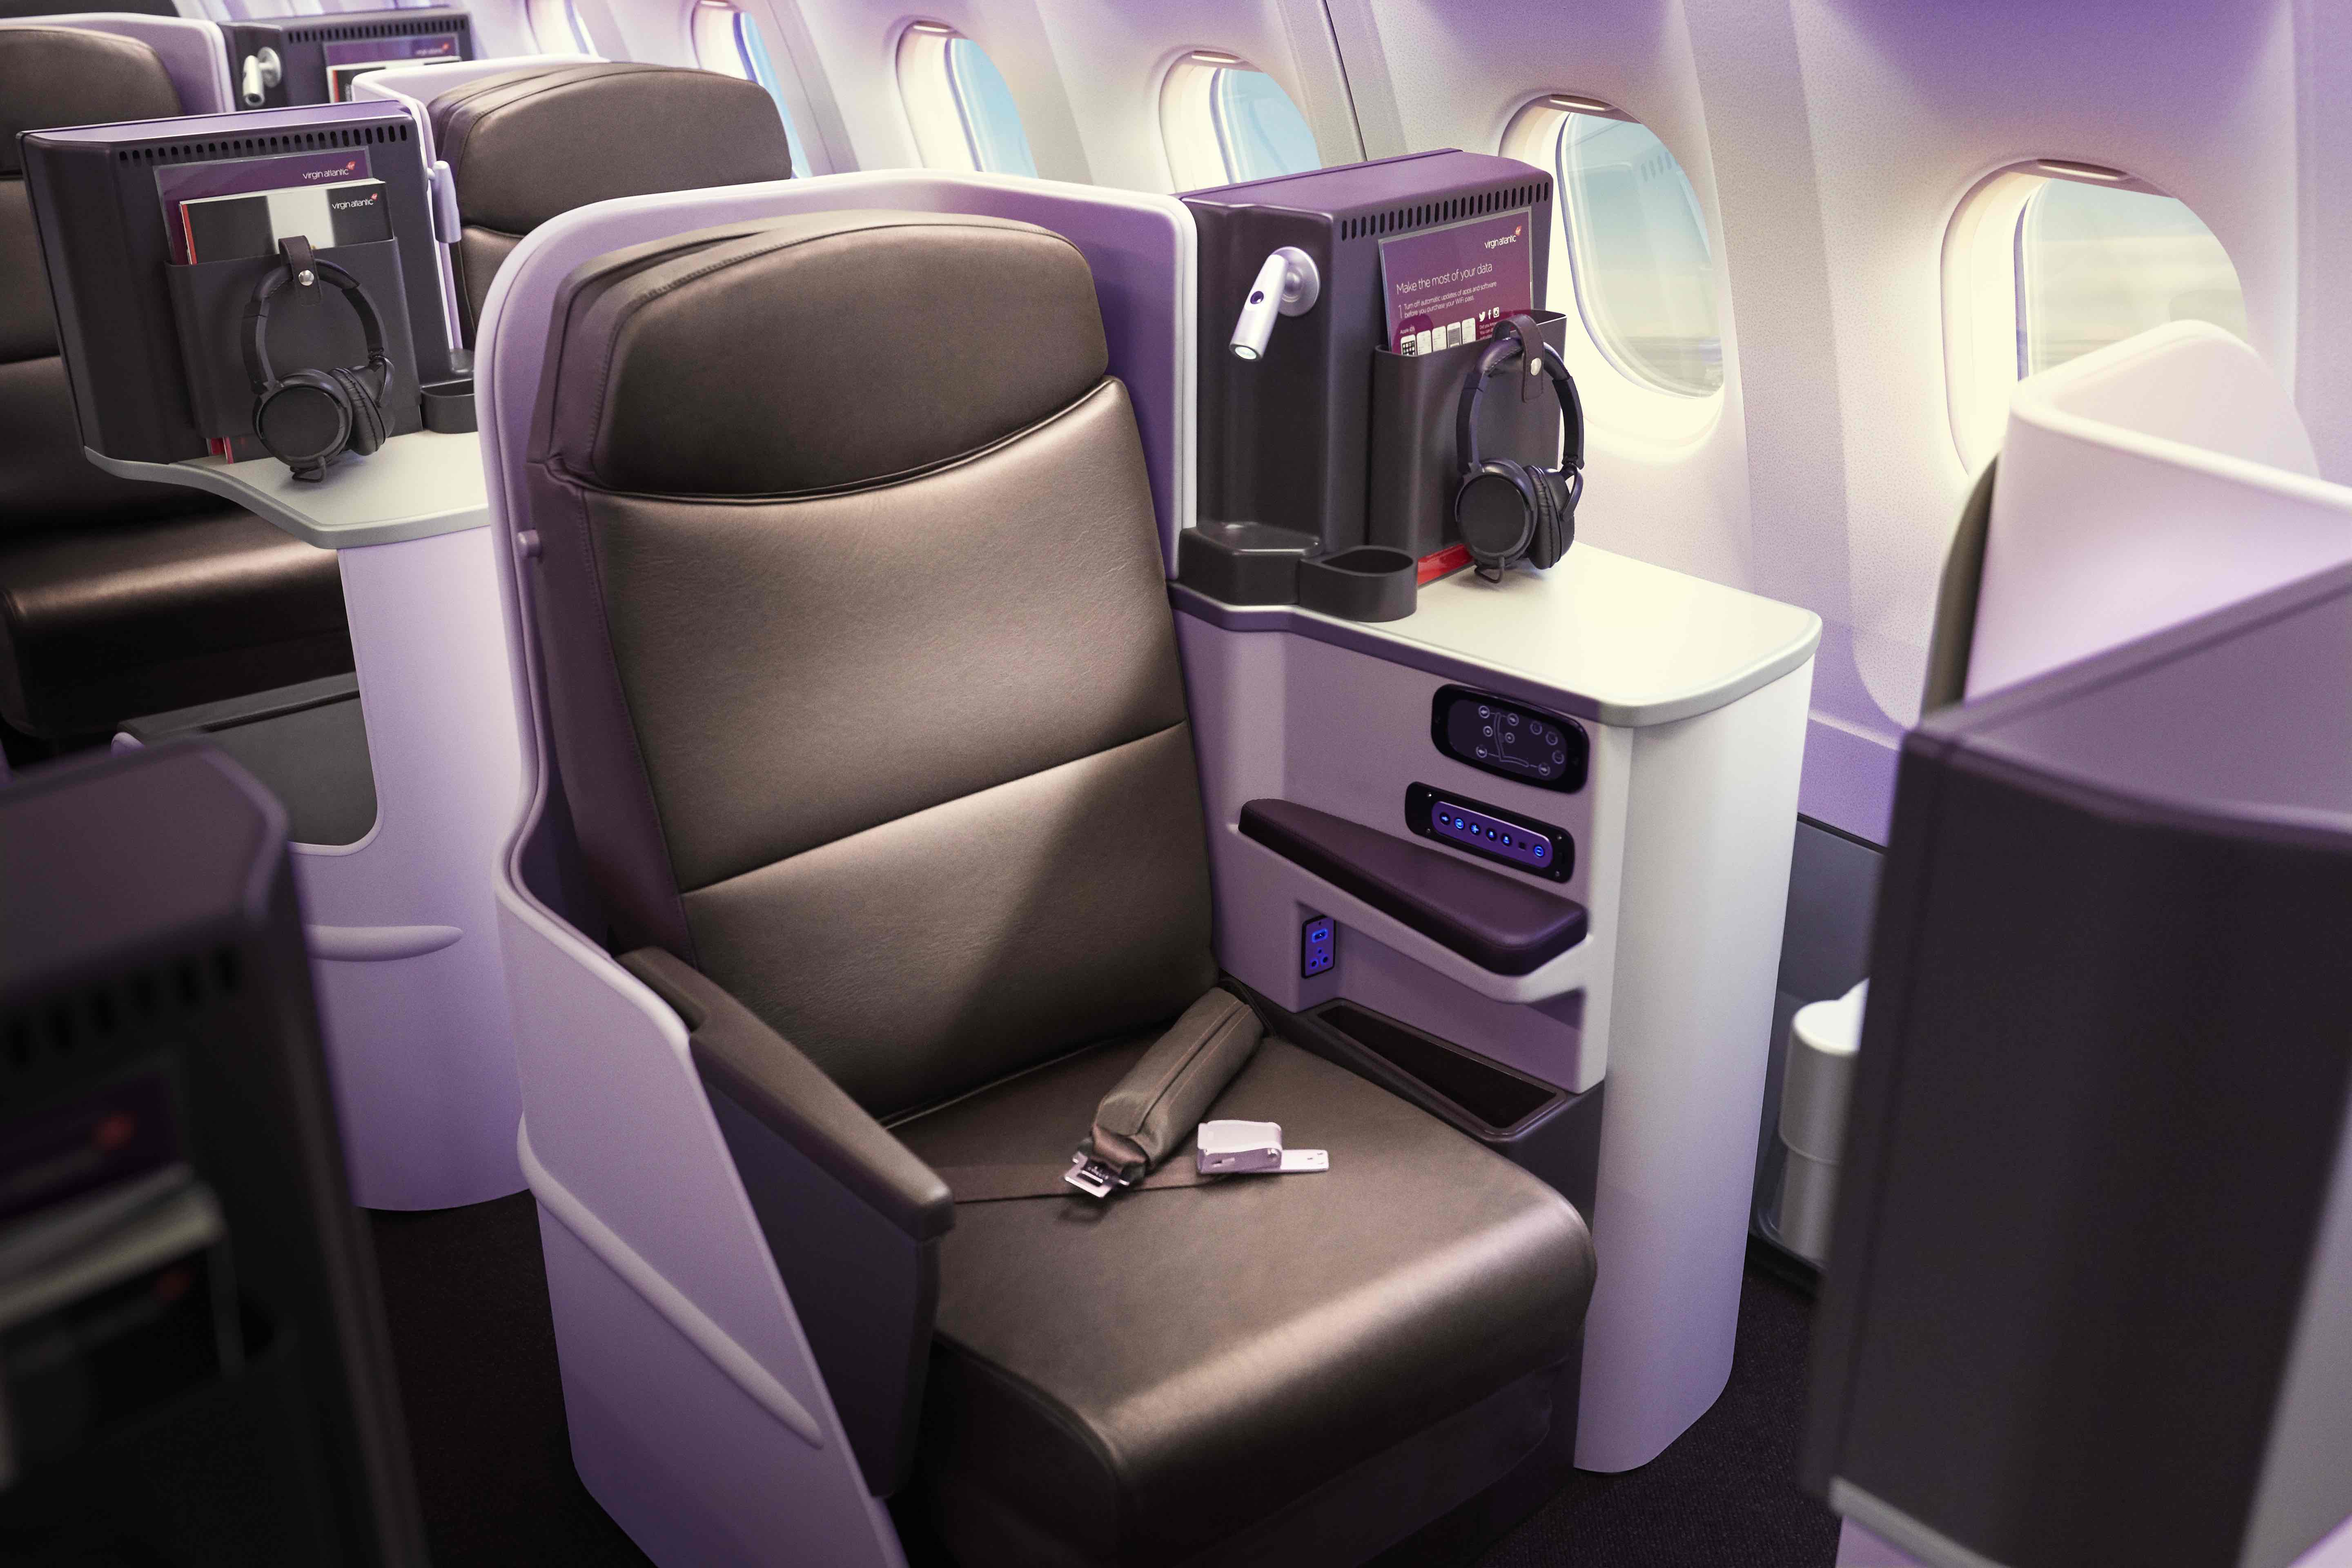 Virgin Atlantic S Gorgeous New Airbus A330 200 Cabins Are